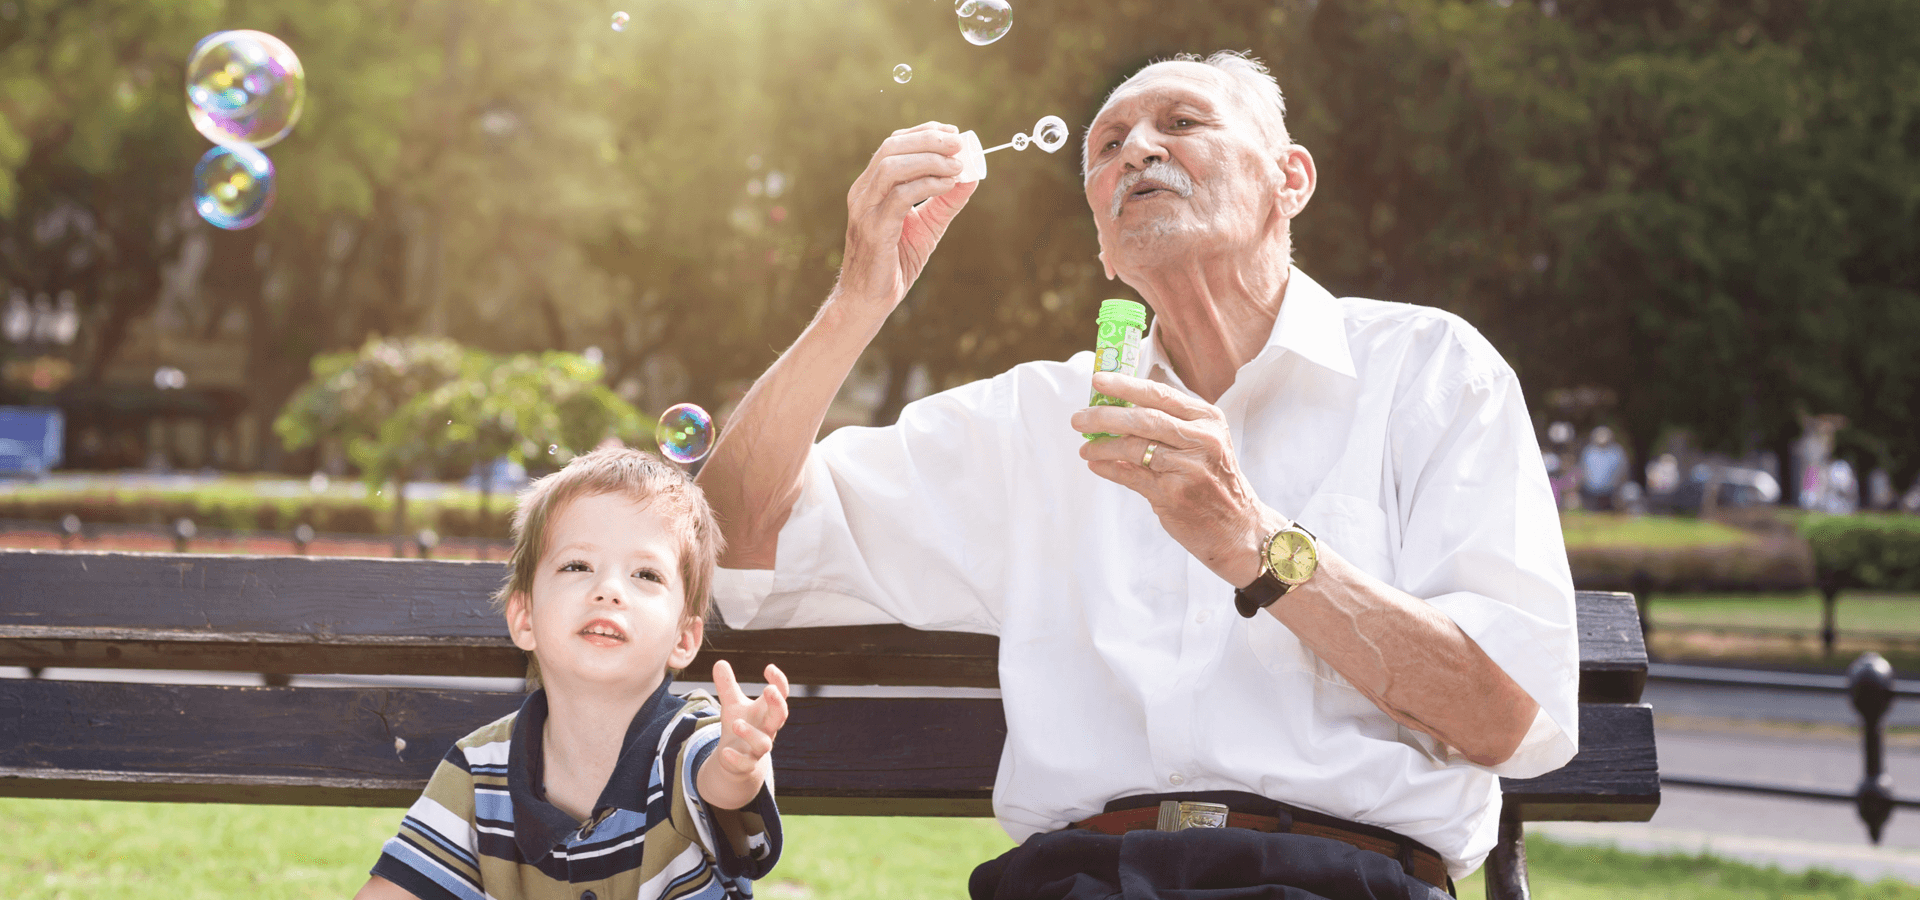 Grandfather Blowing Bubbles on Bench with Grandson